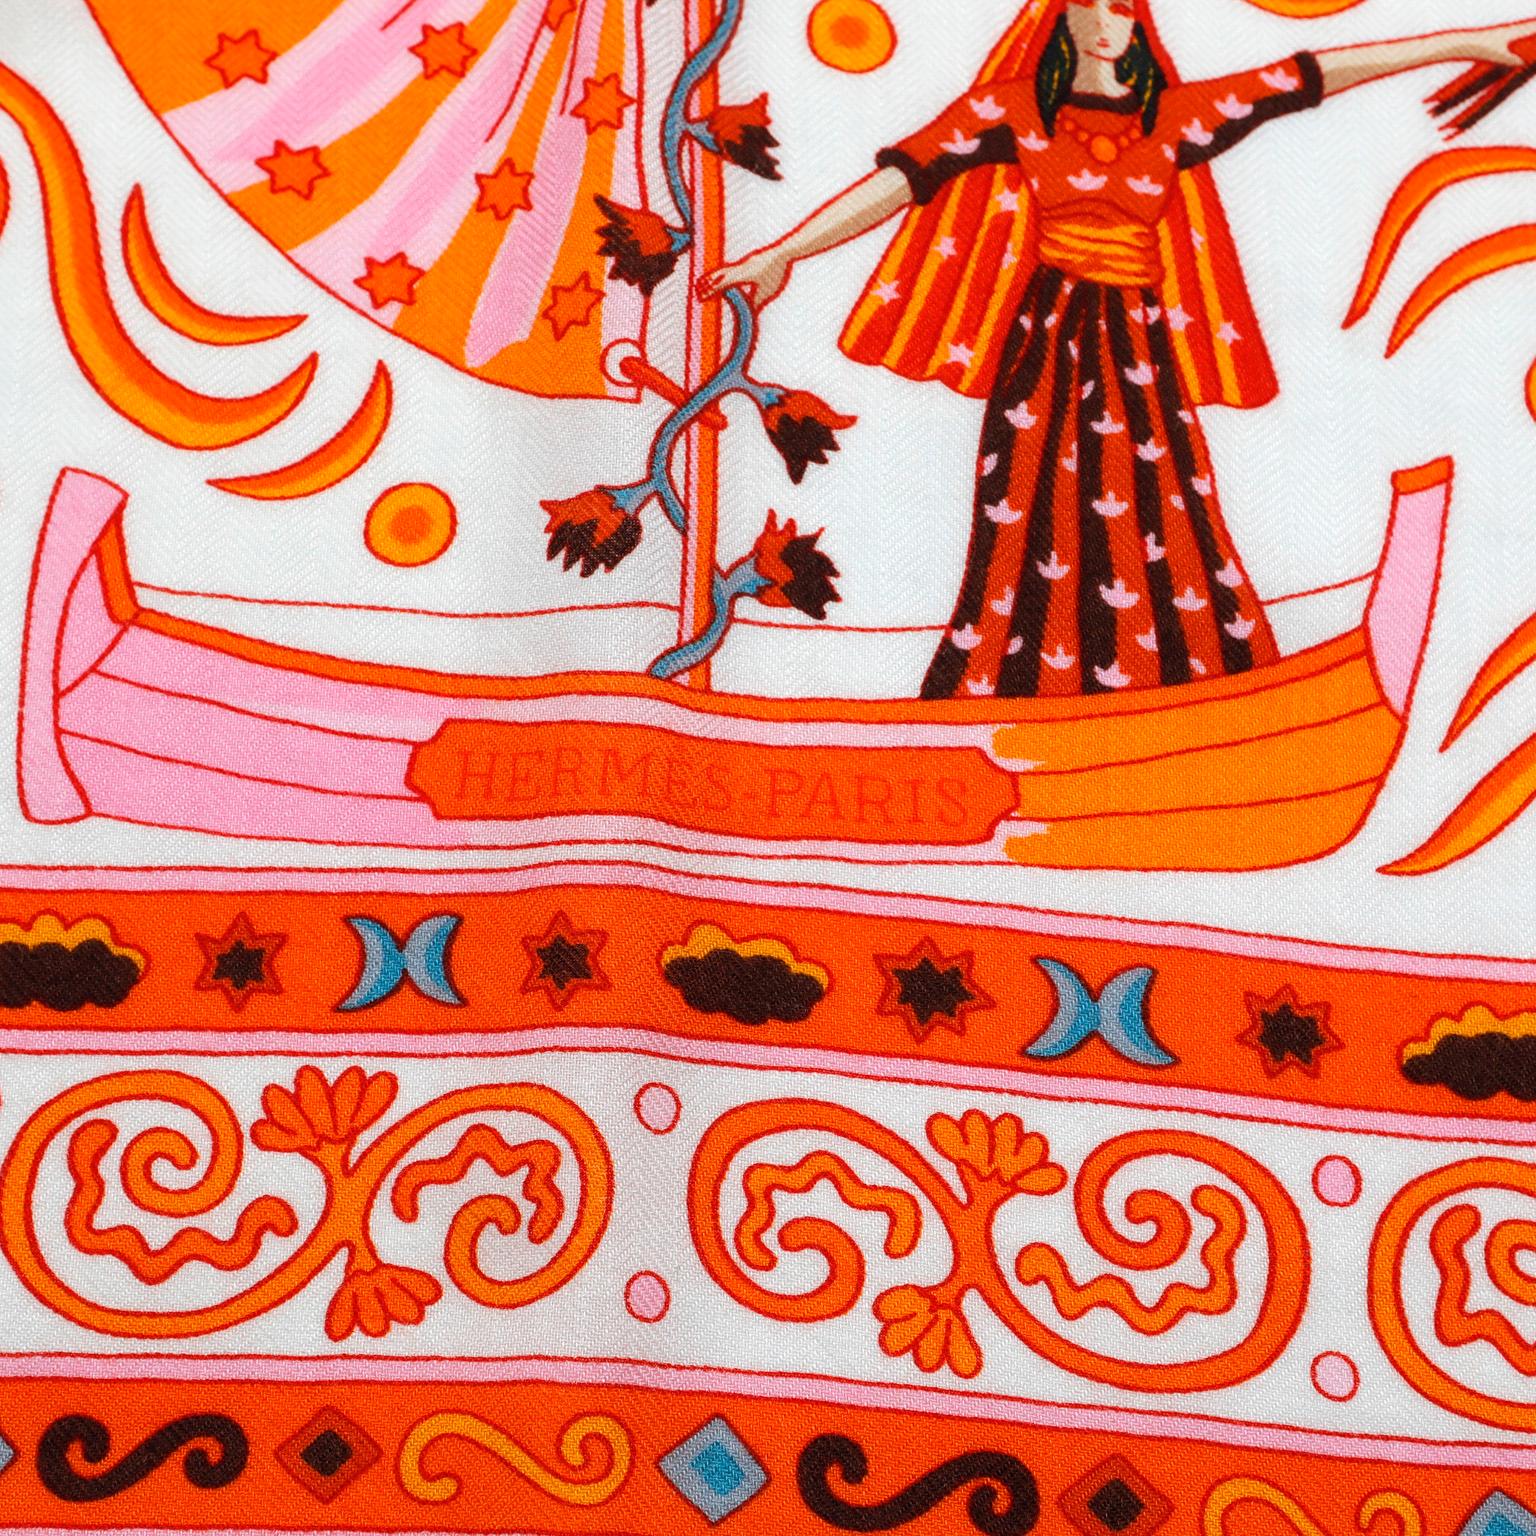 This authentic Hermès Orange and Pink Peuple du Vent Cashmere Scarf is in pristine condition.  Design features animals and performers of the Roma people.  Designed by Christine Henry.  Box included.

PBF 13392